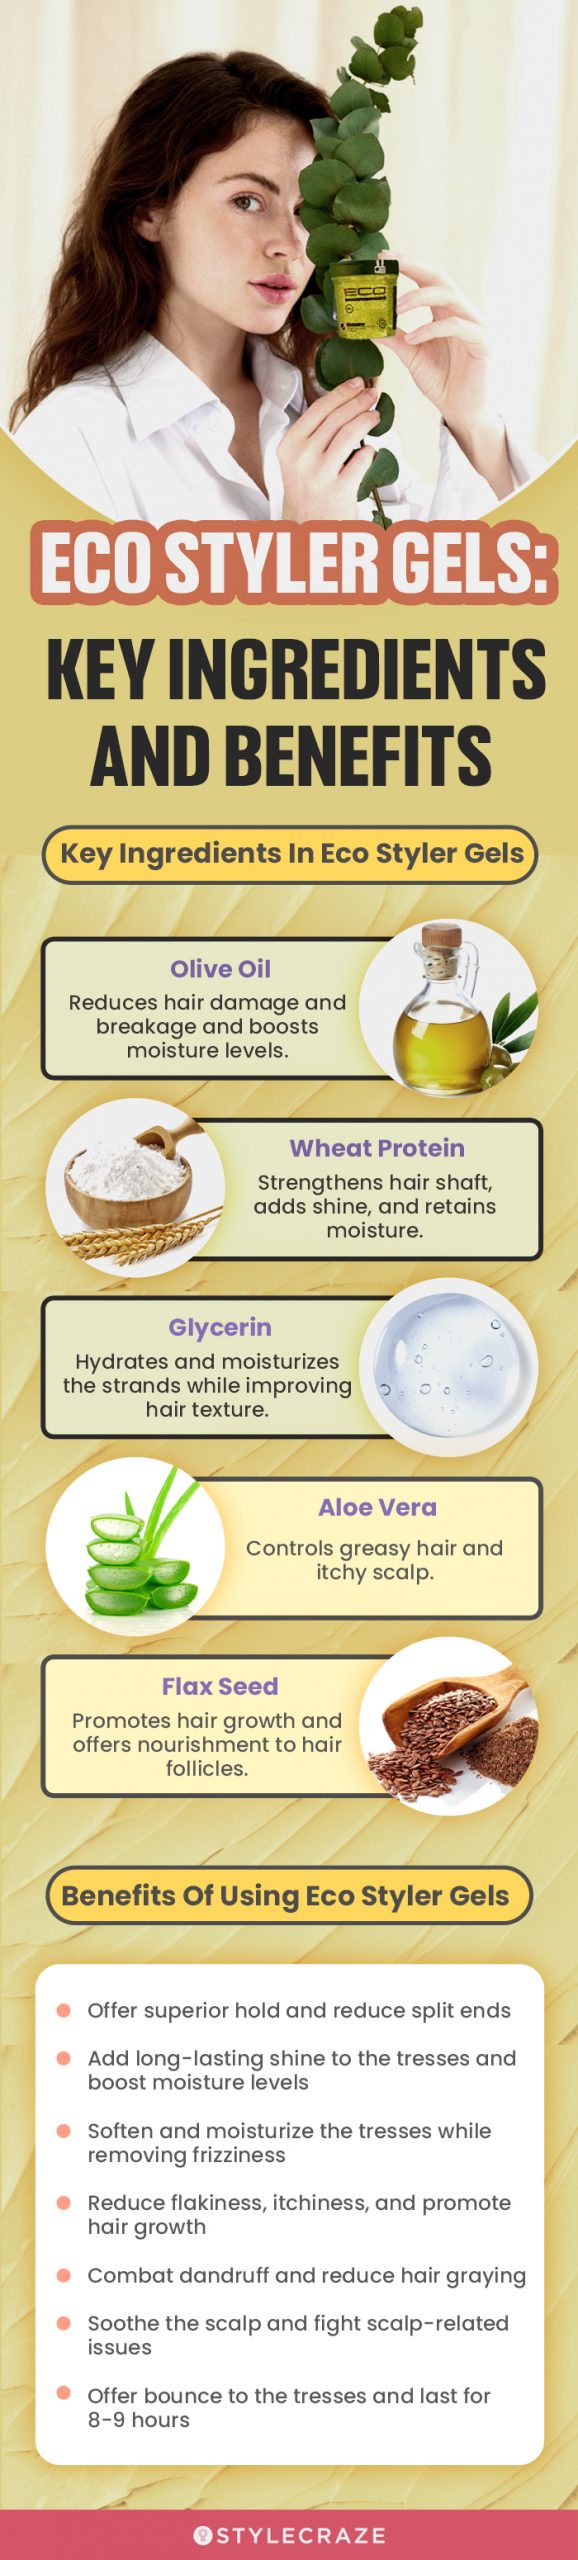 Eco Styler Gels: Key Ingredients And Benefits (infographic)